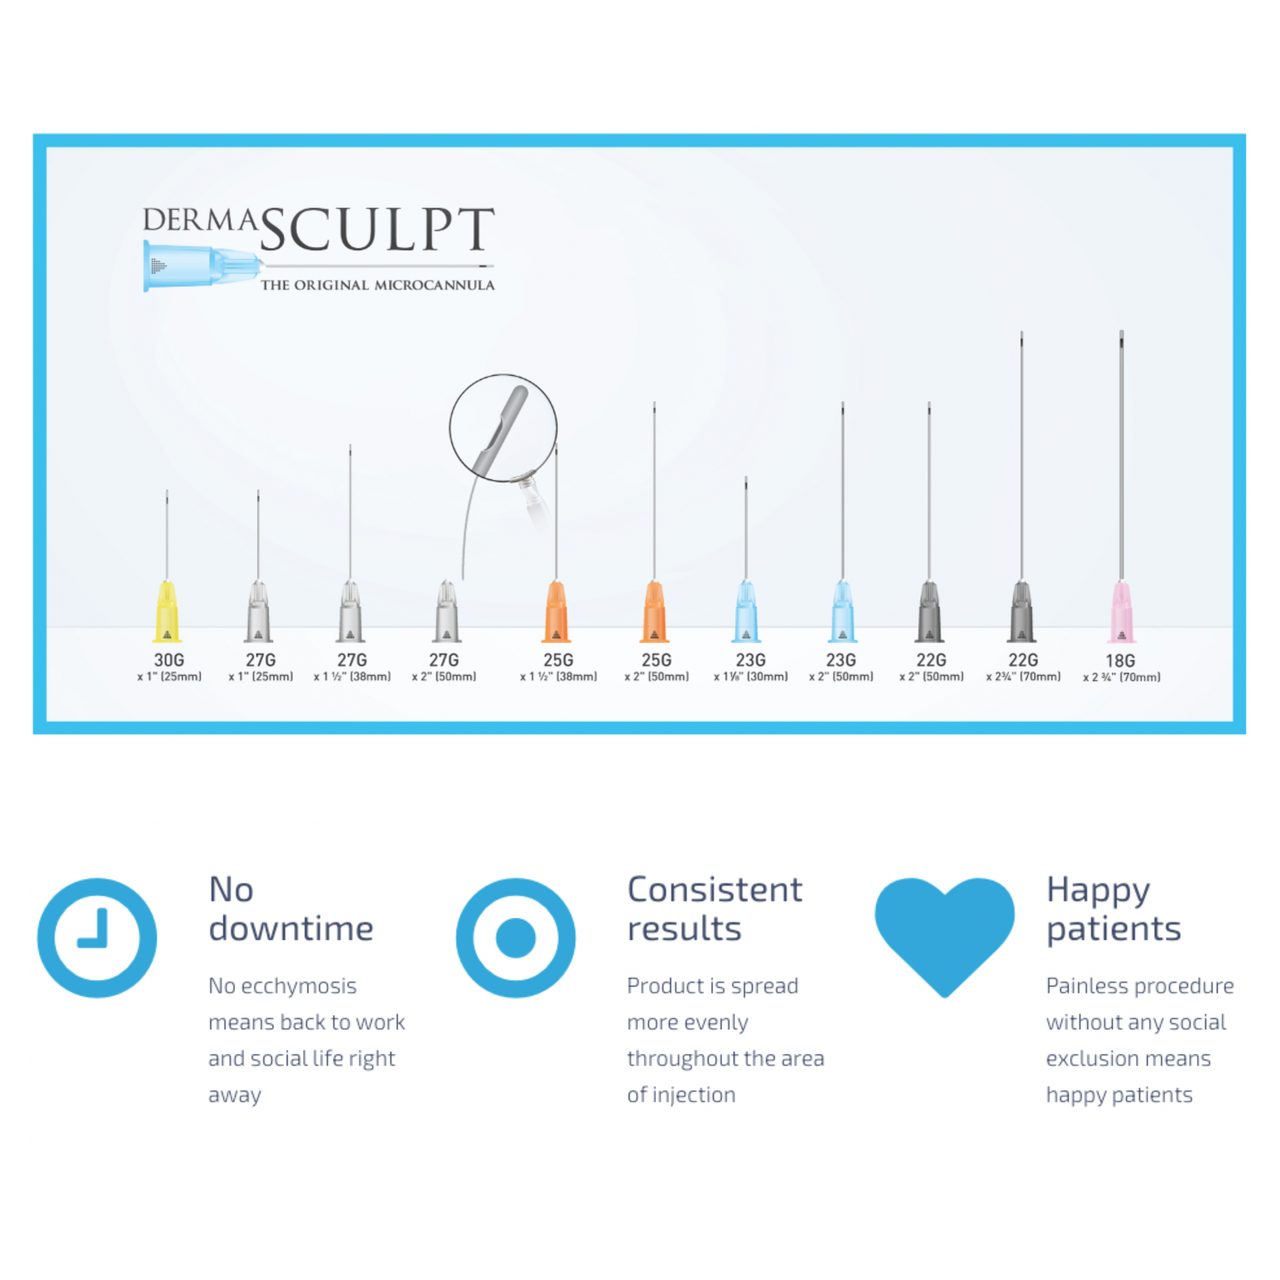 DermaSculpt microcannulas come in different gauges and lengths and can be used with any fillers on the market today.